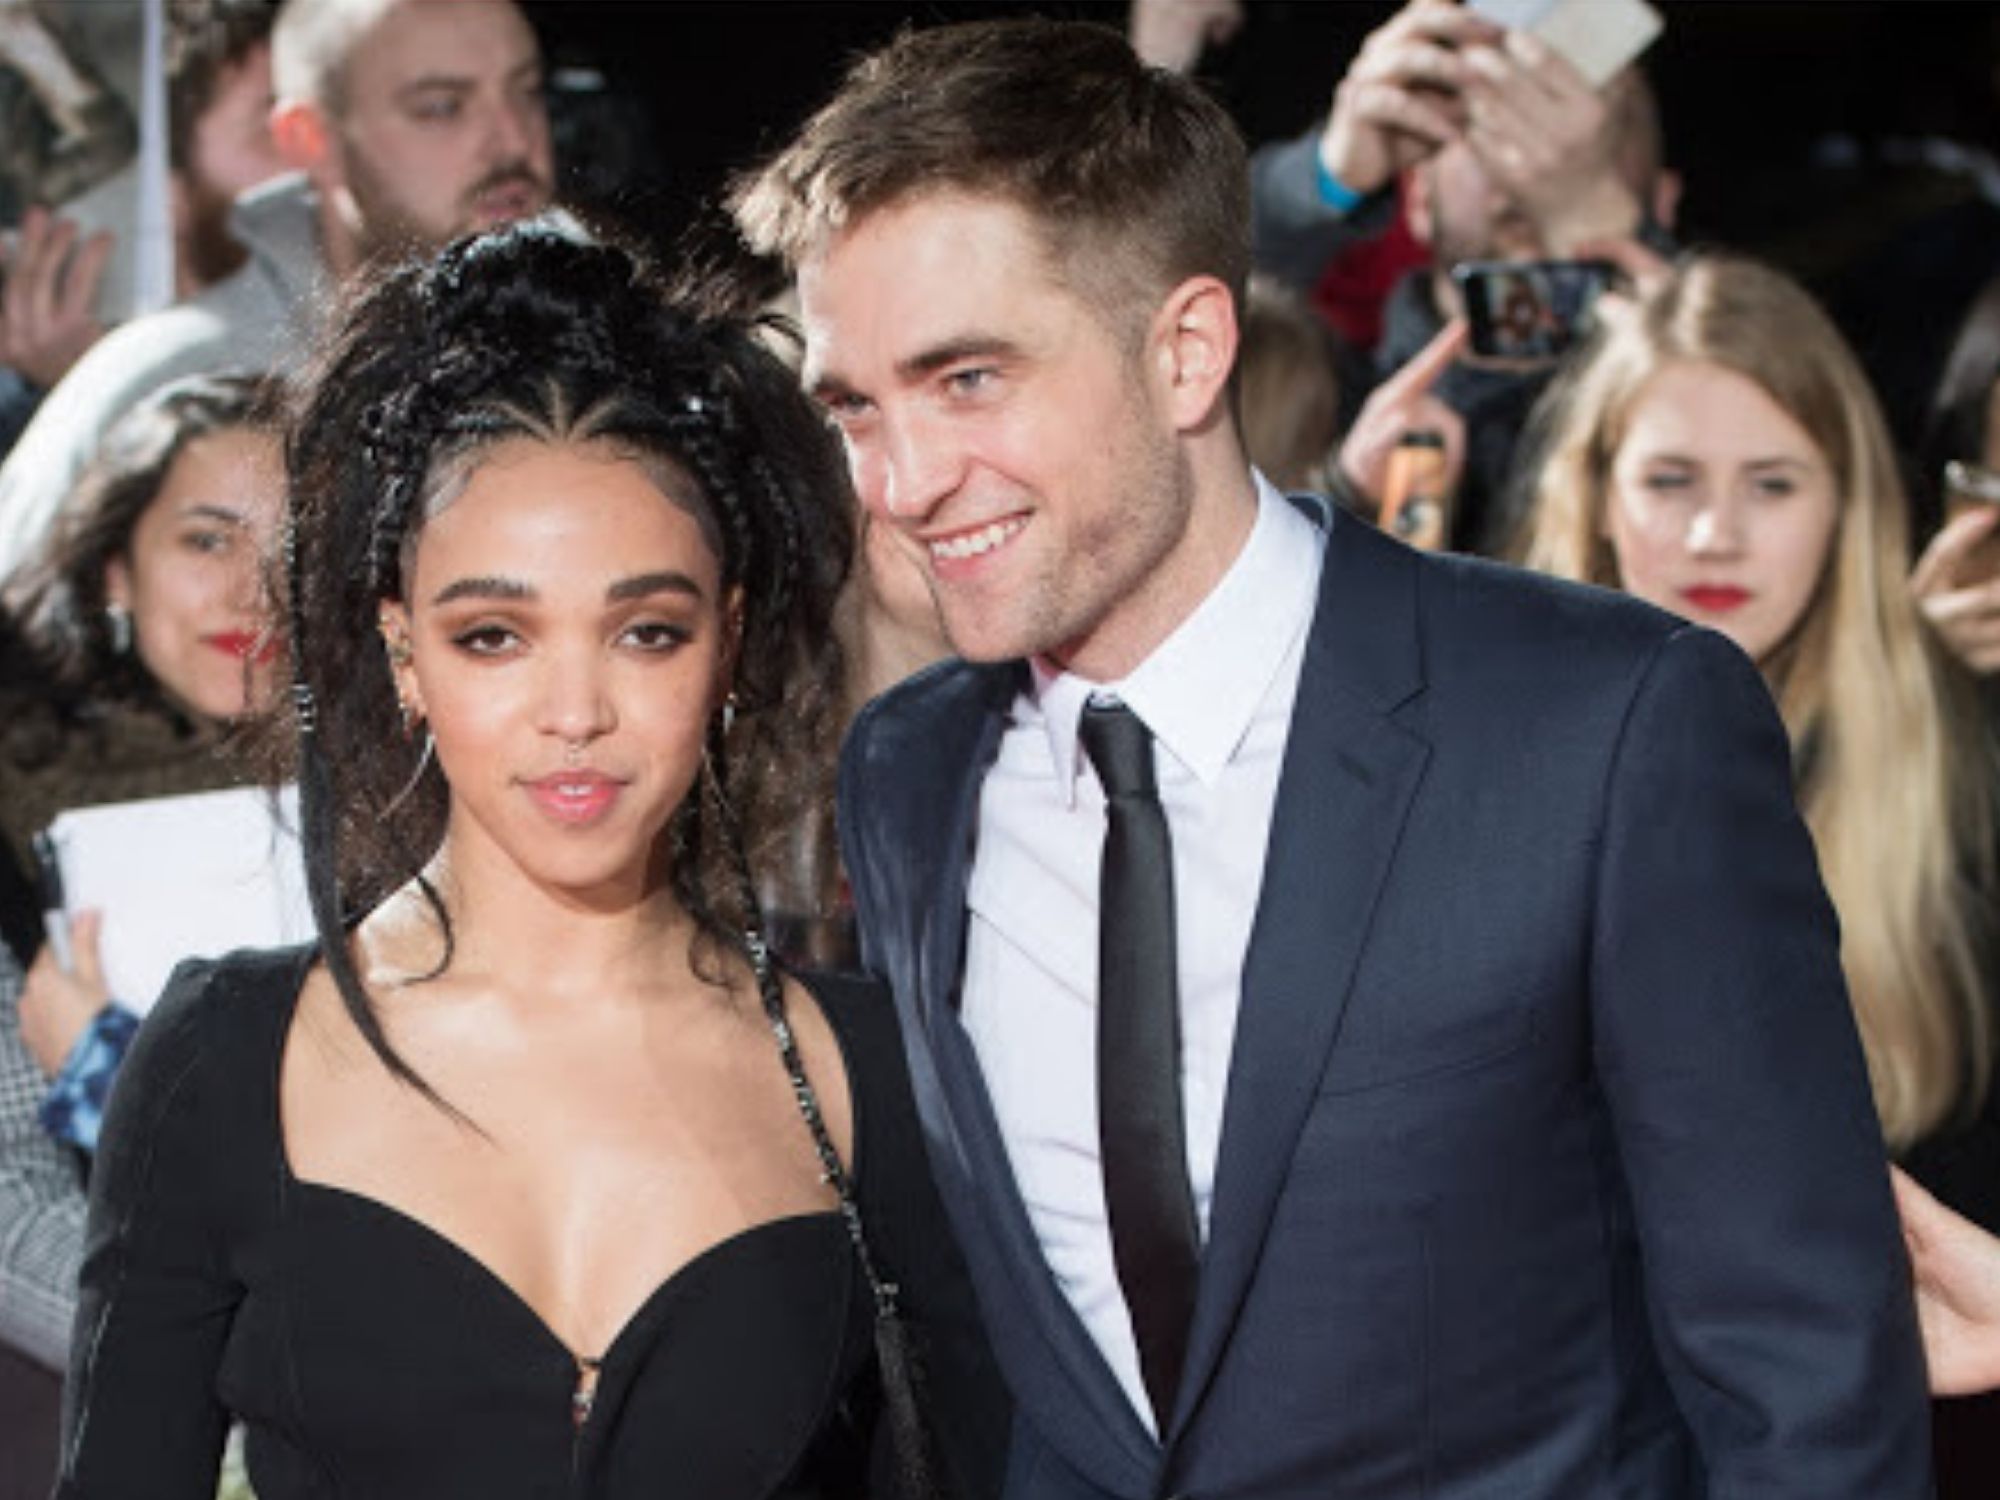 Who does robert pattinson date